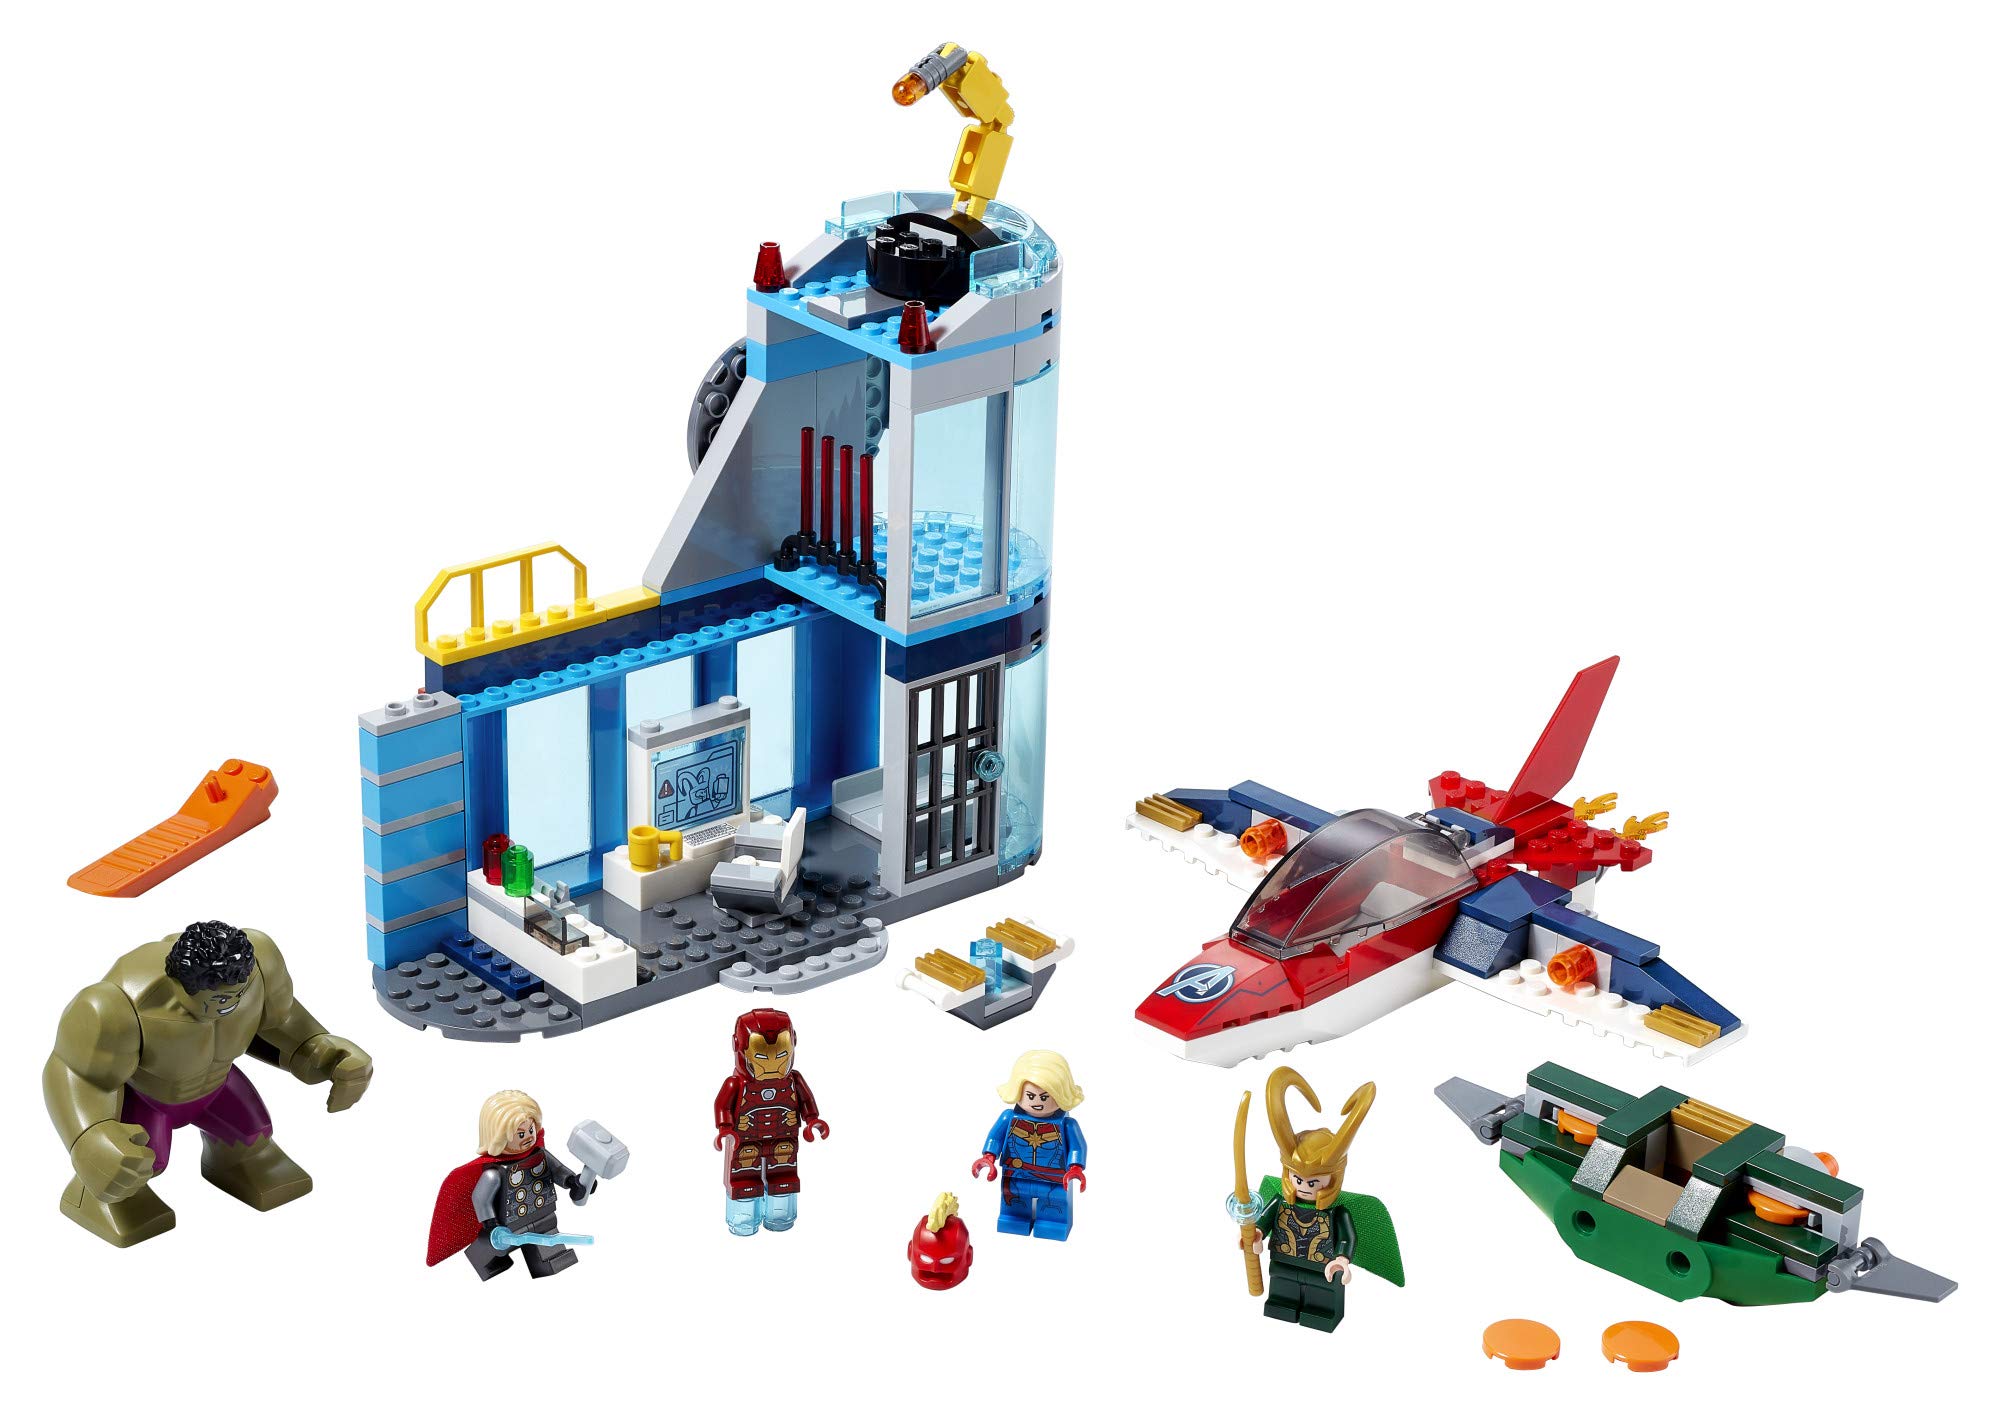 LEGO Marvel Avengers Wrath of Loki 76152 Building Toy with Marvel Avengers Minifigures and Tesseract; Great Gift for Kids Who Love Captain Marvel, Iron Man and Thor (223 Pieces)